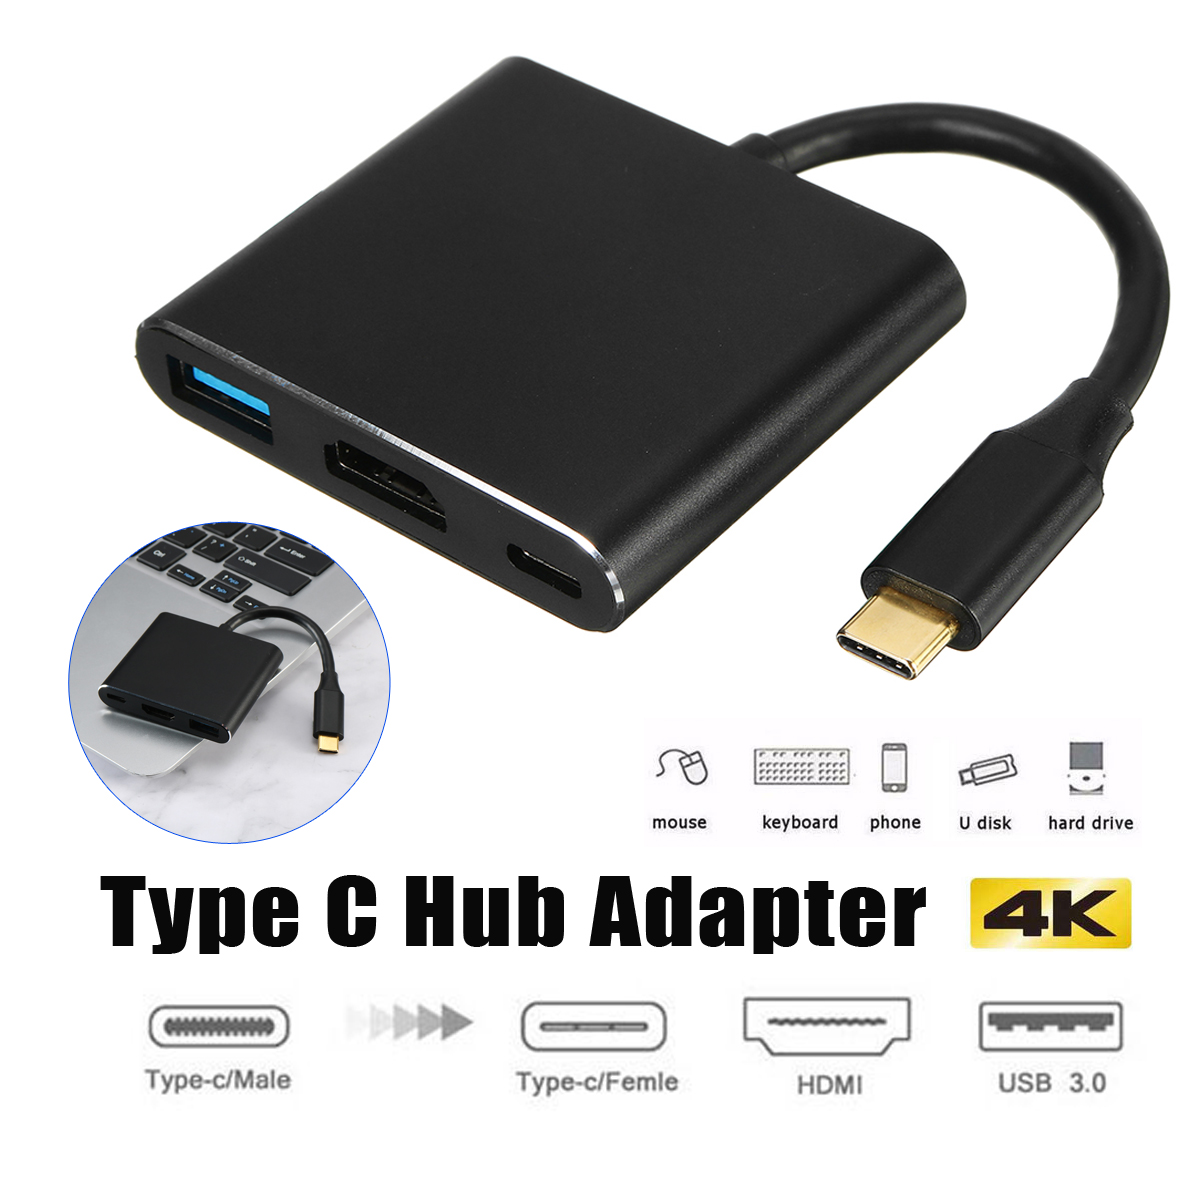 USB30-Docking-Station-Type-C-to-HDMI-USB-HUB-Adapter-Support-4K-30HZ-for-Notebook-MacBook-Expansion--1688311-1